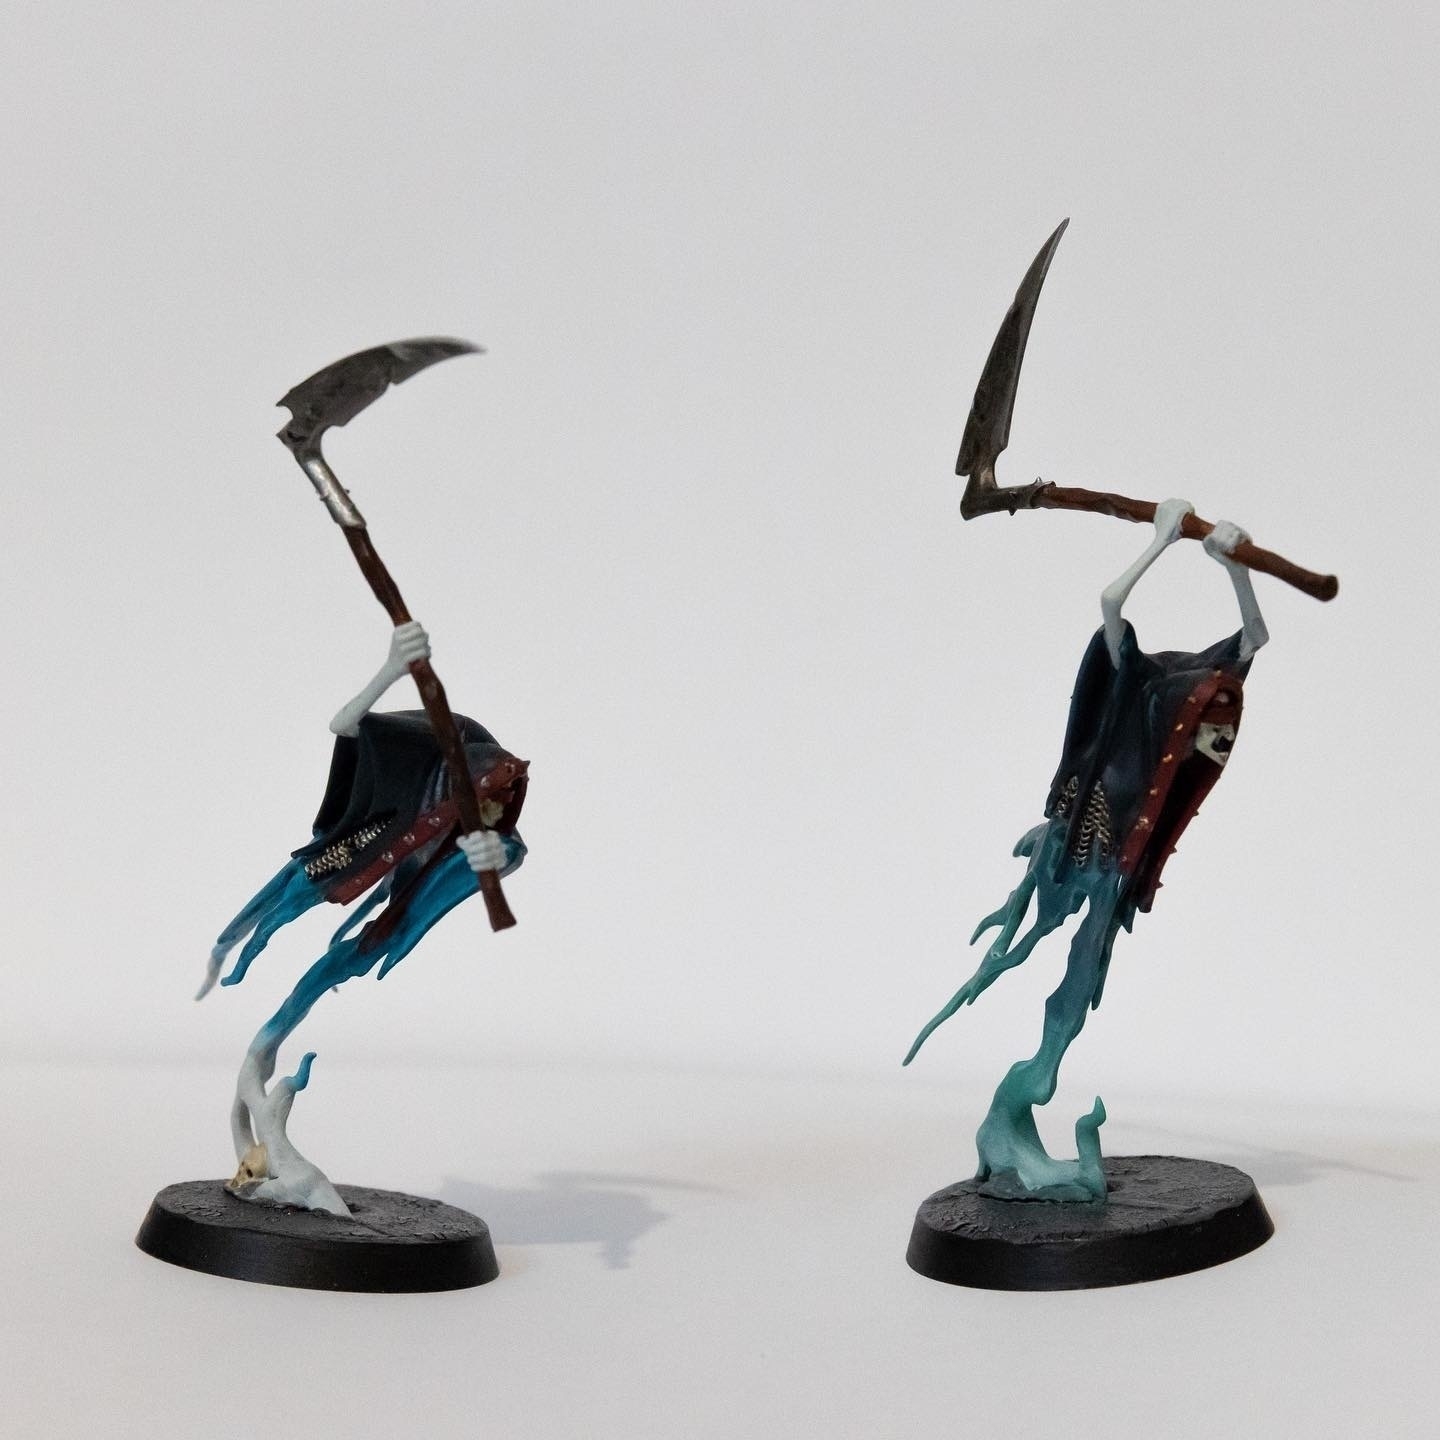 Painted Grimghast Reapers on a white background.